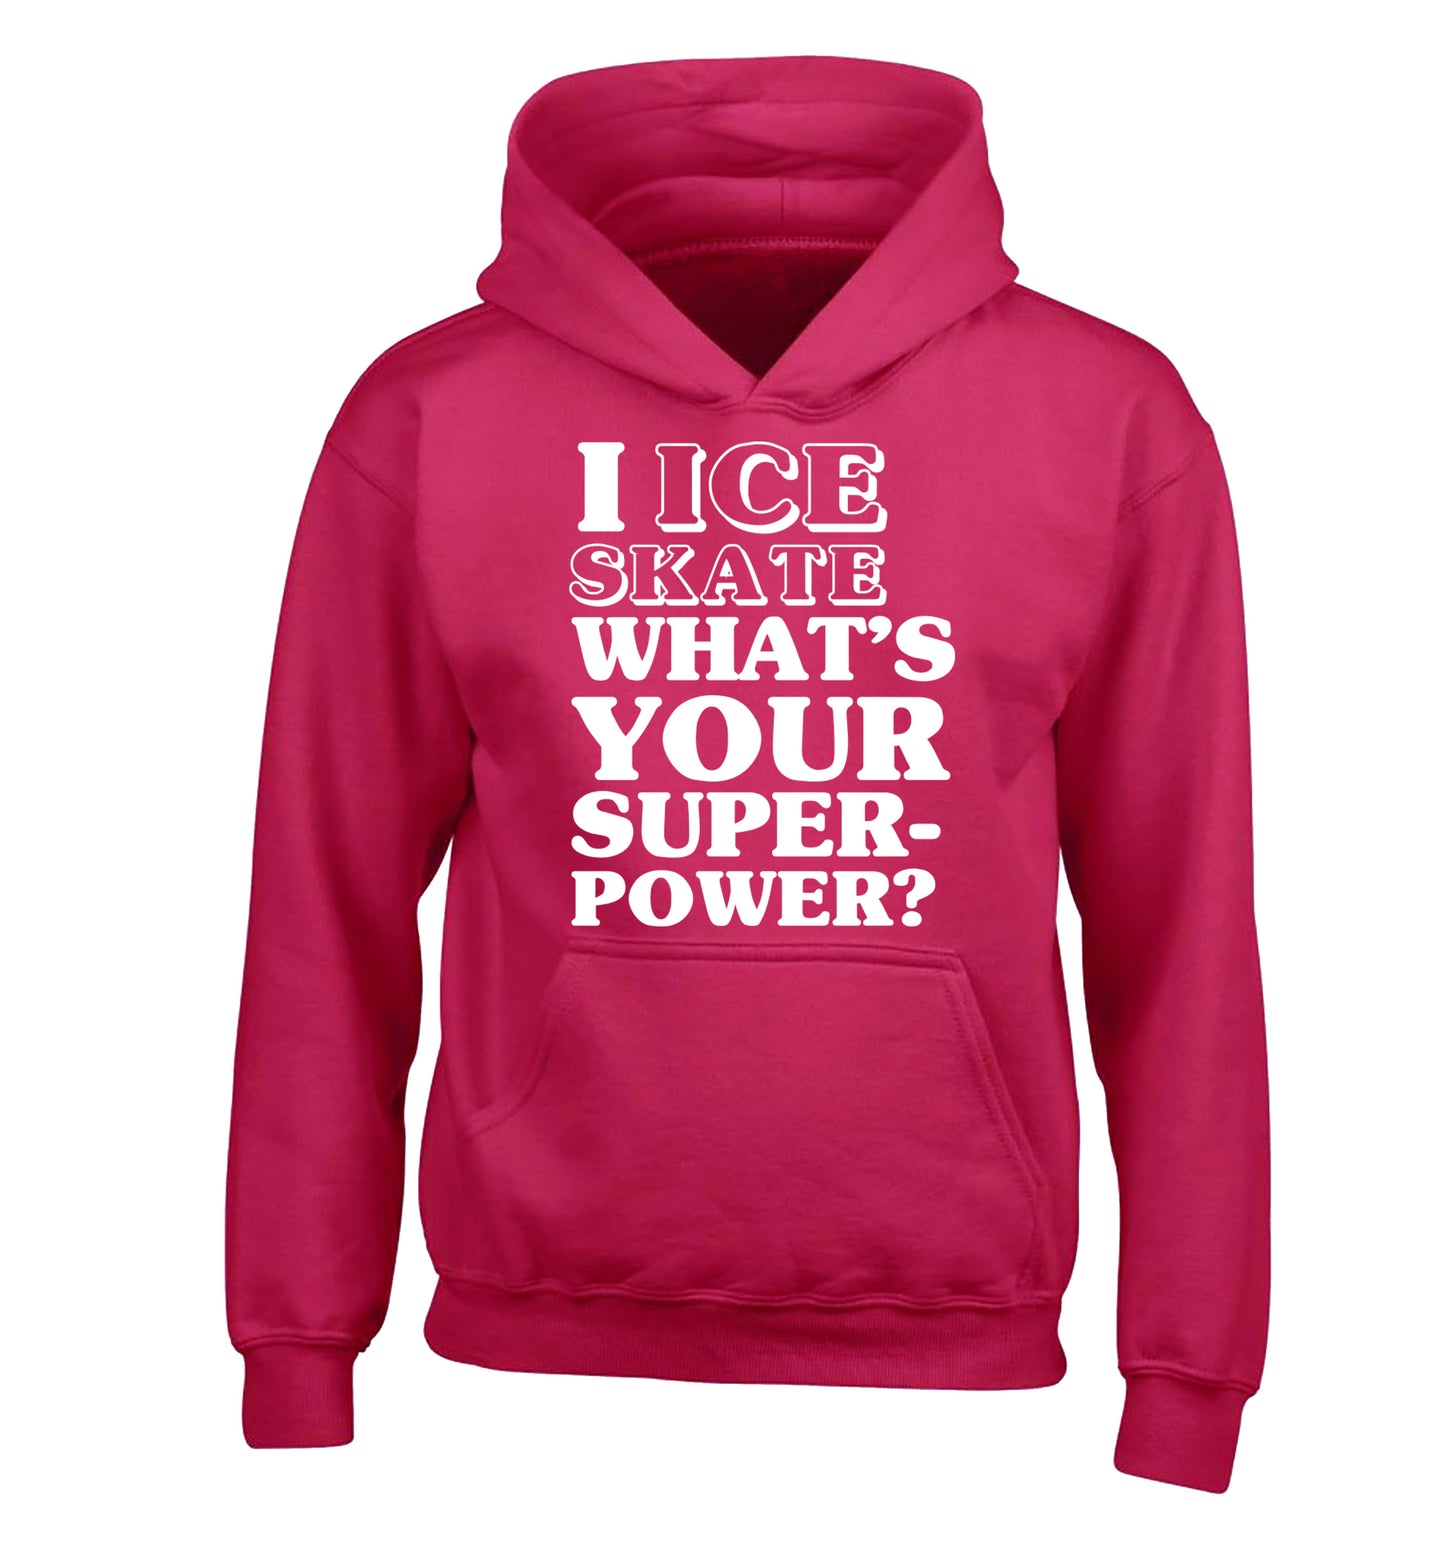 I ice skate what's your superpower? children's pink hoodie 12-14 Years